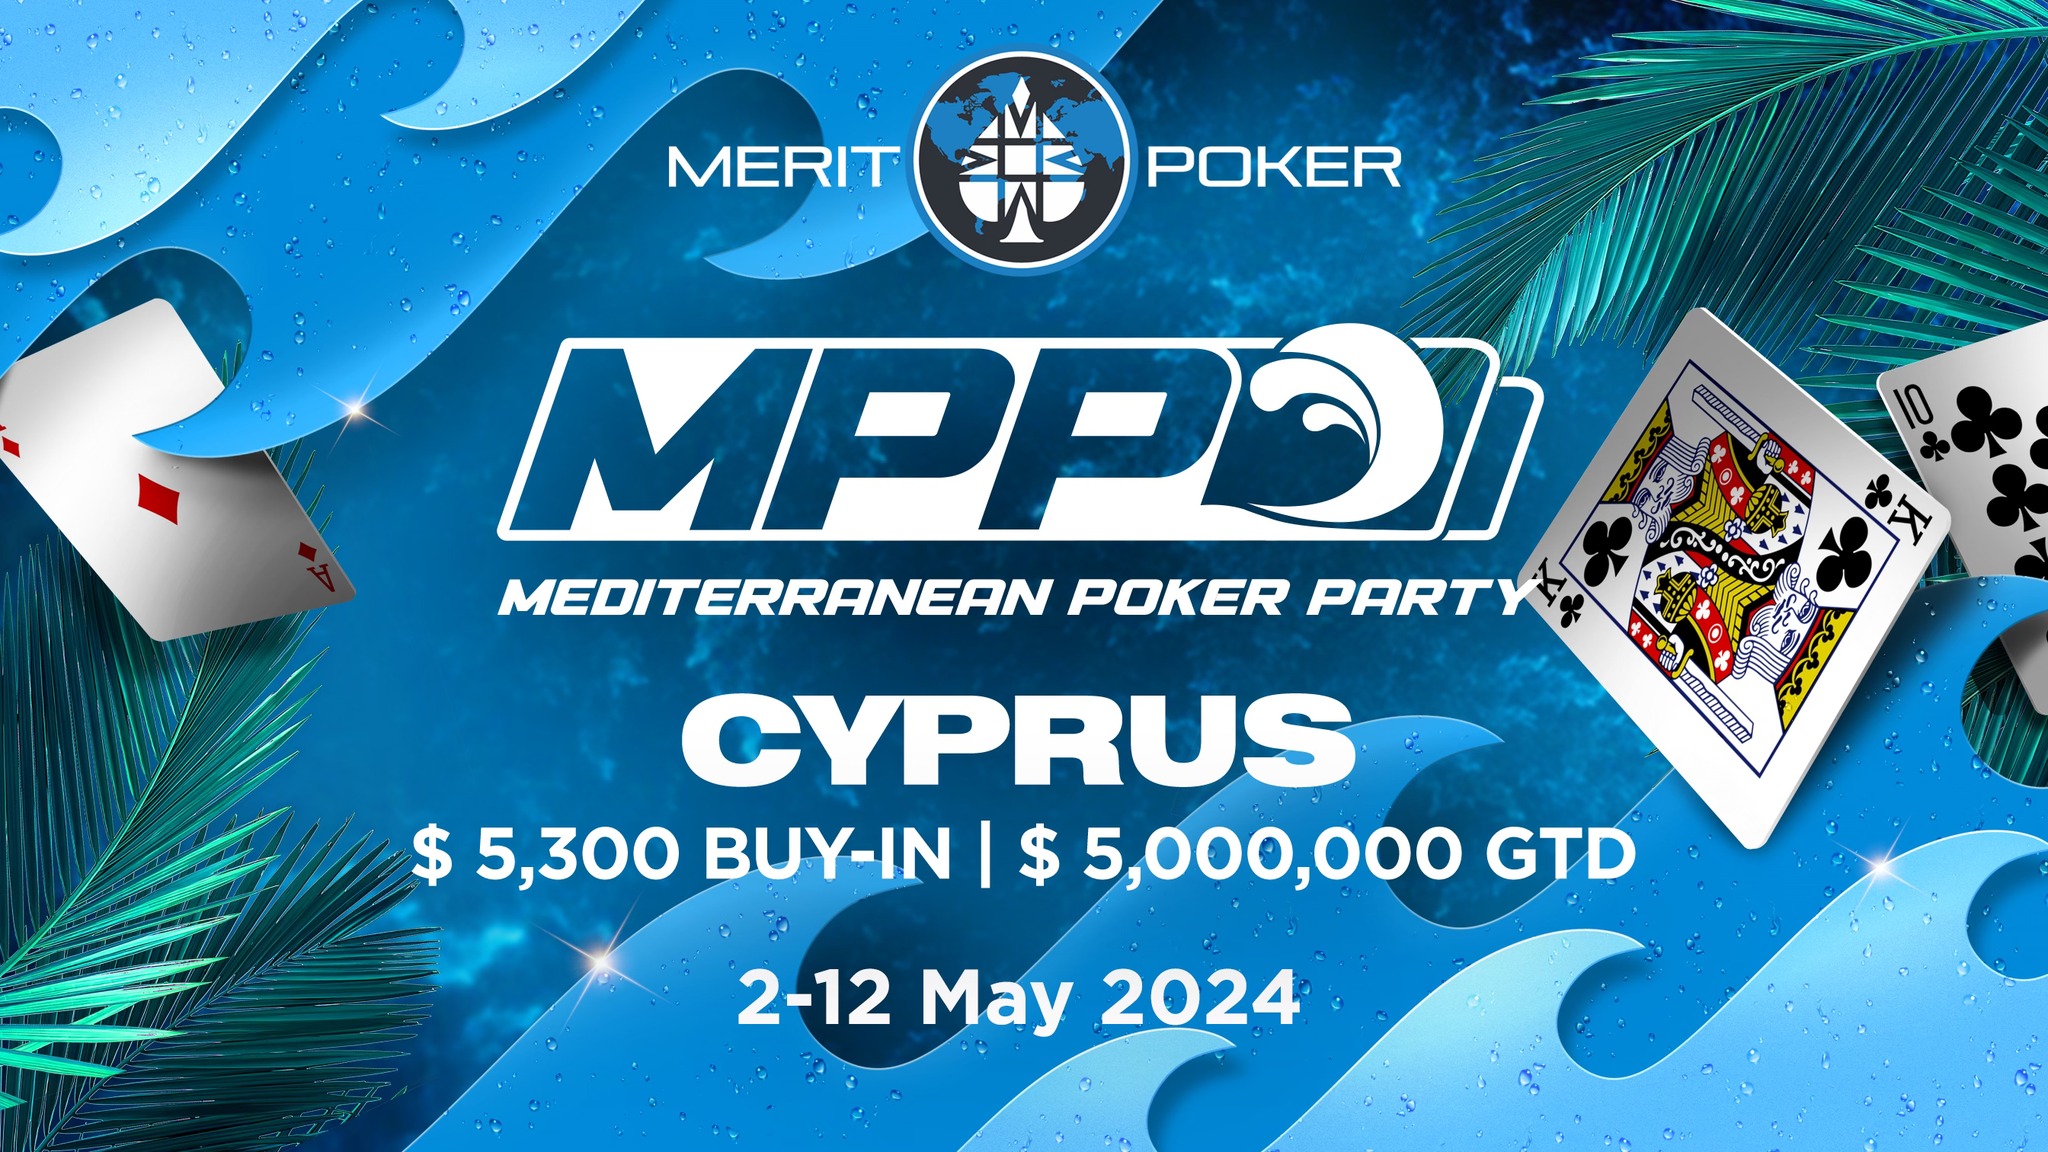 The Mediterranean Poker Party in May 2024 on Cyprus!